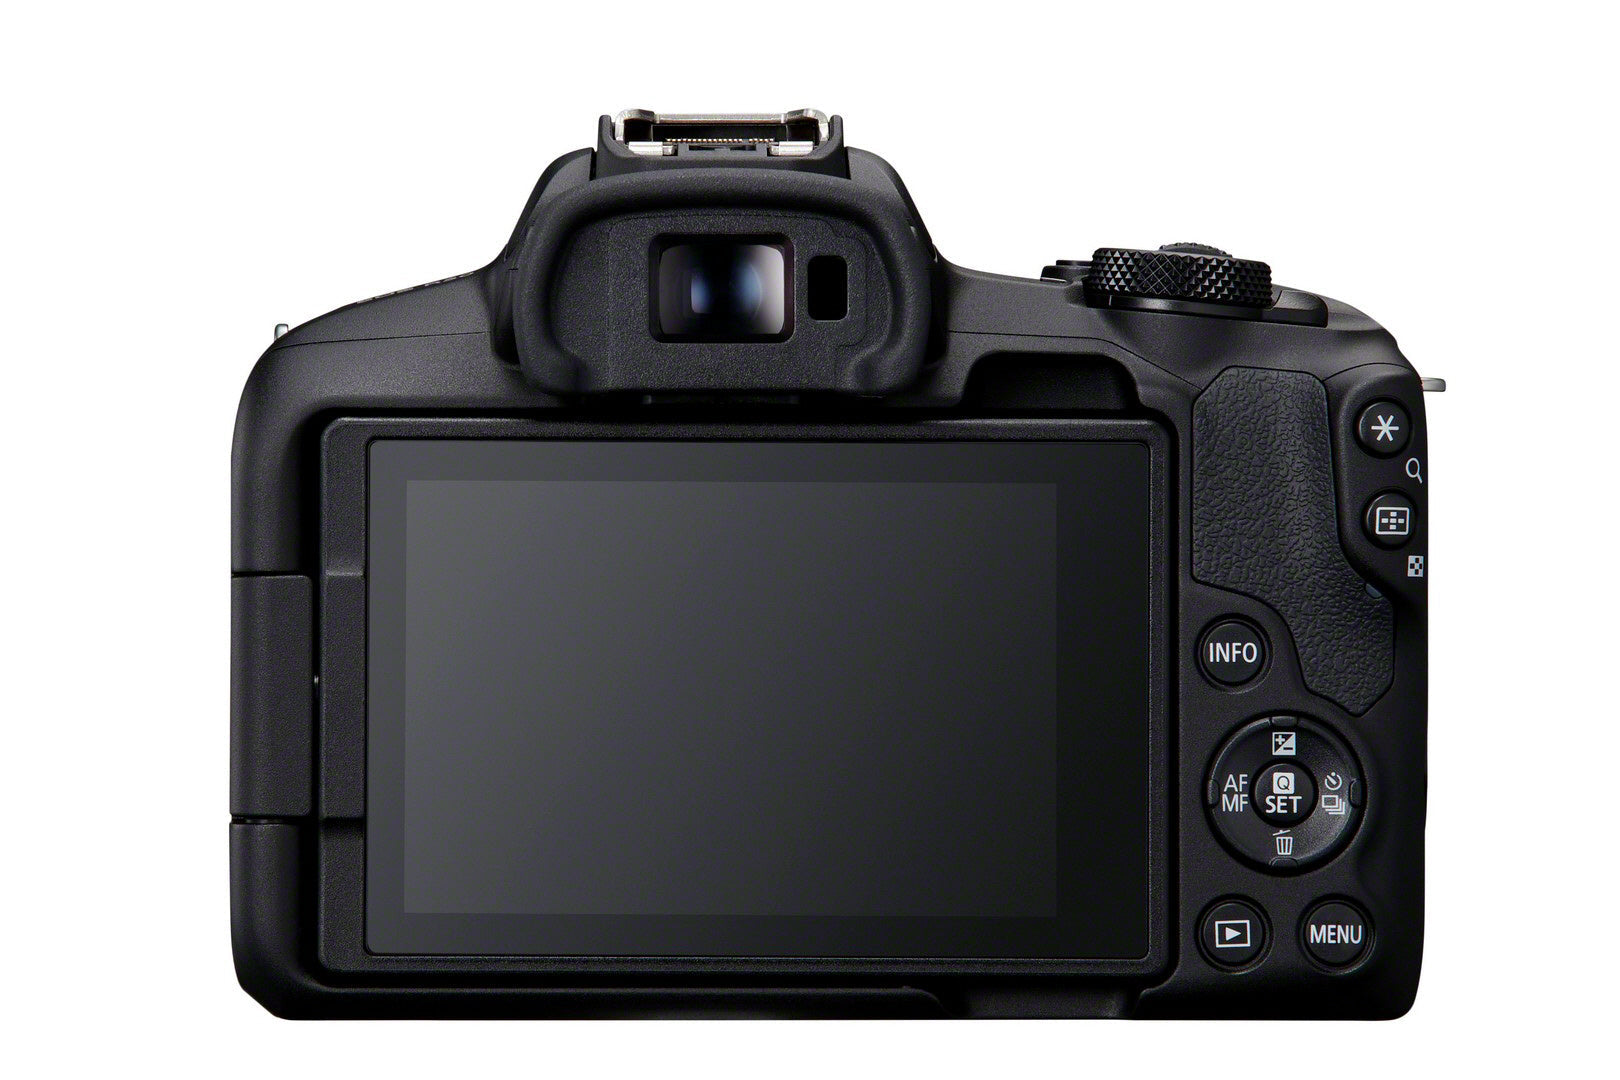 Canon EOS R50 Mirrorless APS-C Body Only - Product Photo 8 - Rear view of the camera body with the screen visible and in it's natural position